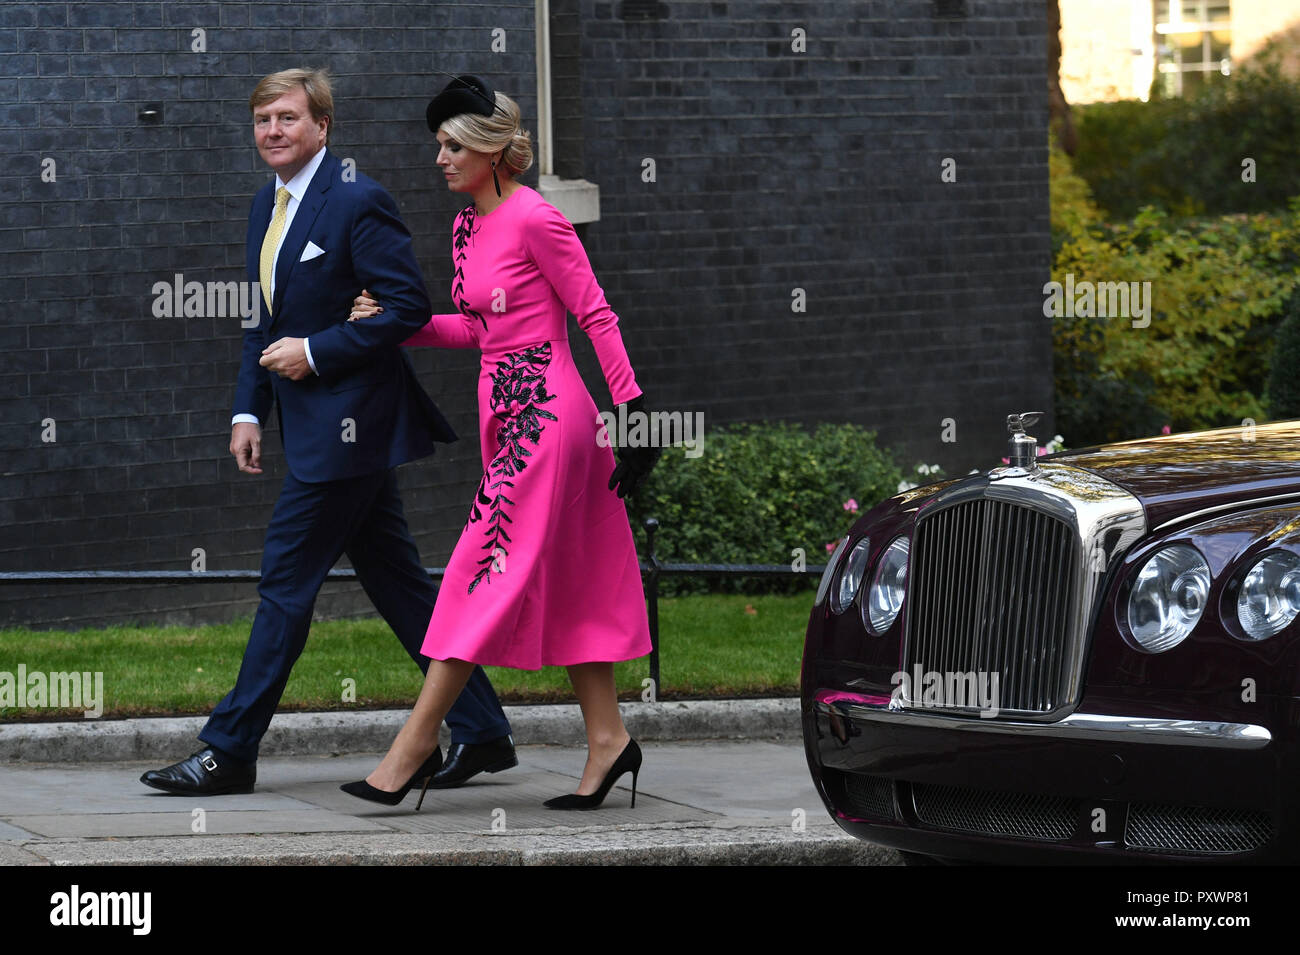 King Willem-Alexander and Queen Maxima of the Netherlands arrive at 10 Downing Street, London, ahead of their meeting with Prime Minister Theresa May, as part of their State Visit to the UK. Stock Photo